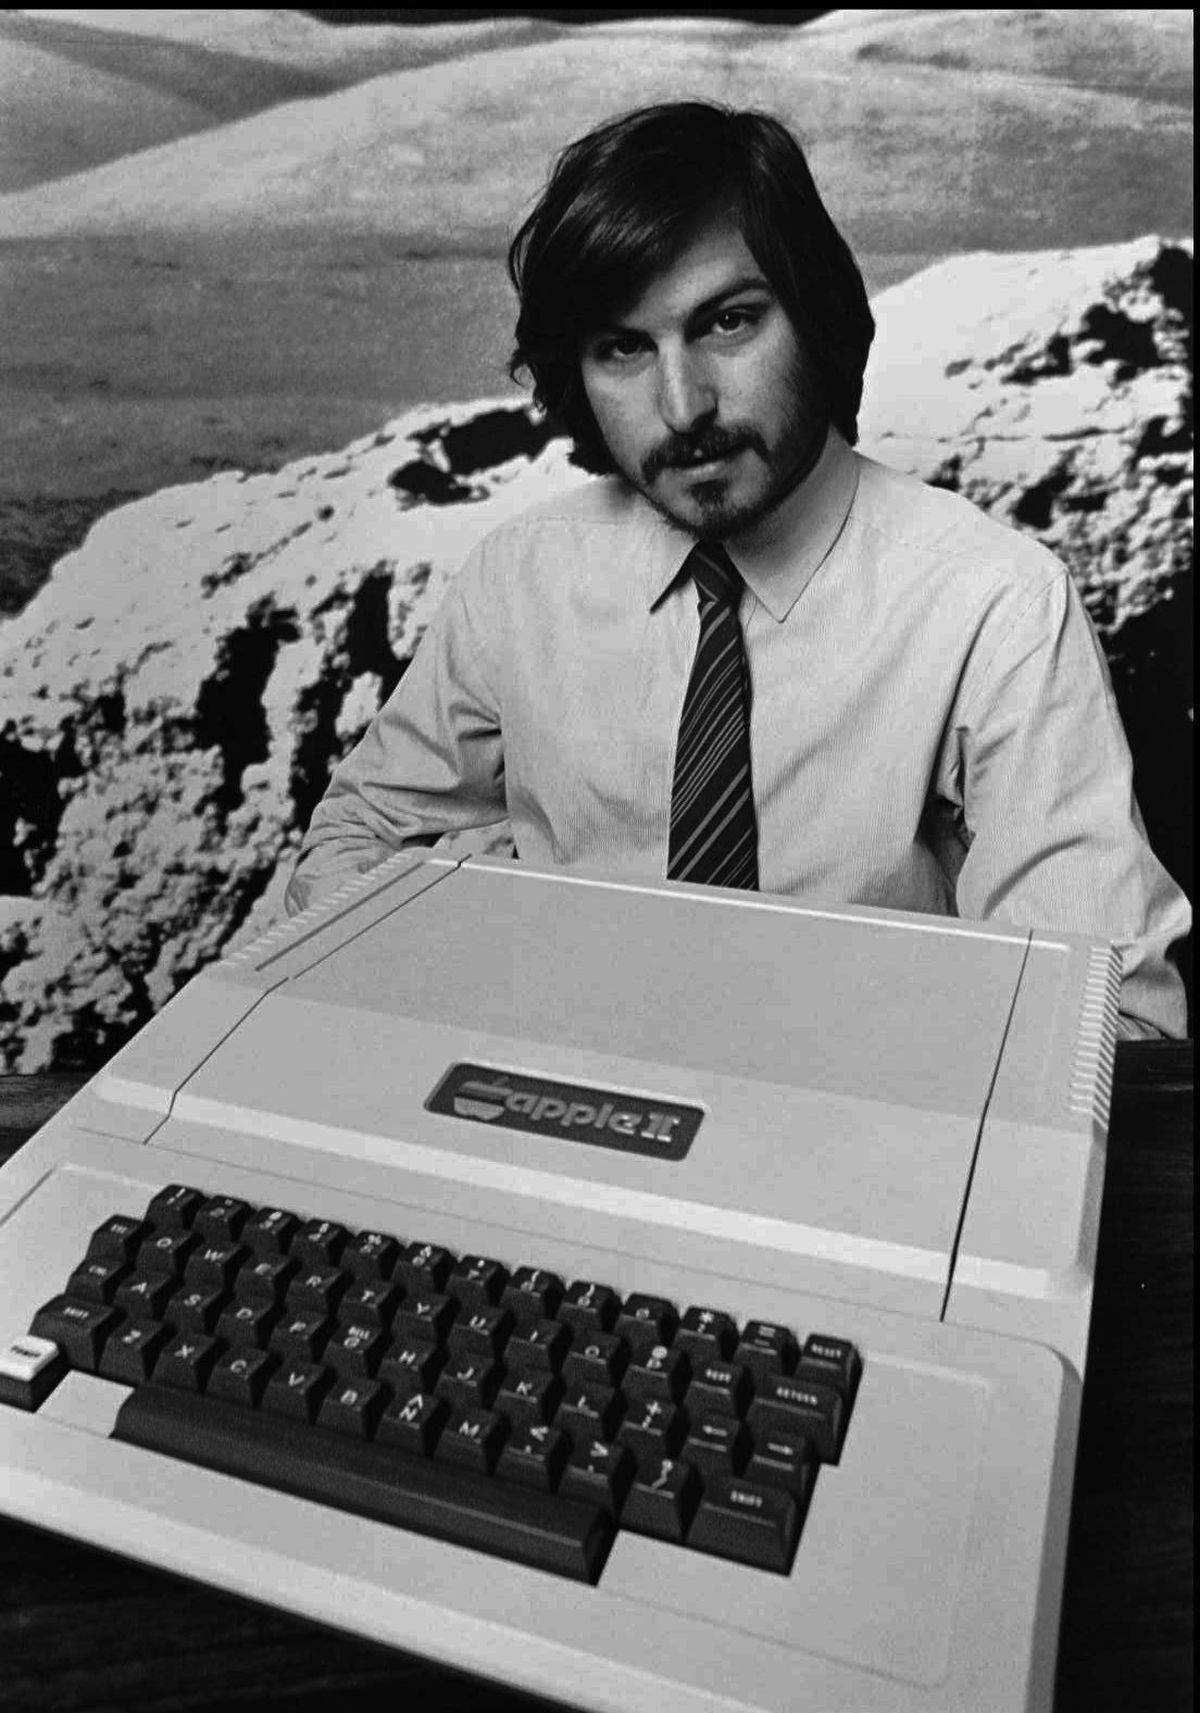 This 1977 file photo shows Apple Computer Inc. founder Steve Jobs as he introduces the new Apple II computer in Cupertino, Calif. (Apple Computers Inc)